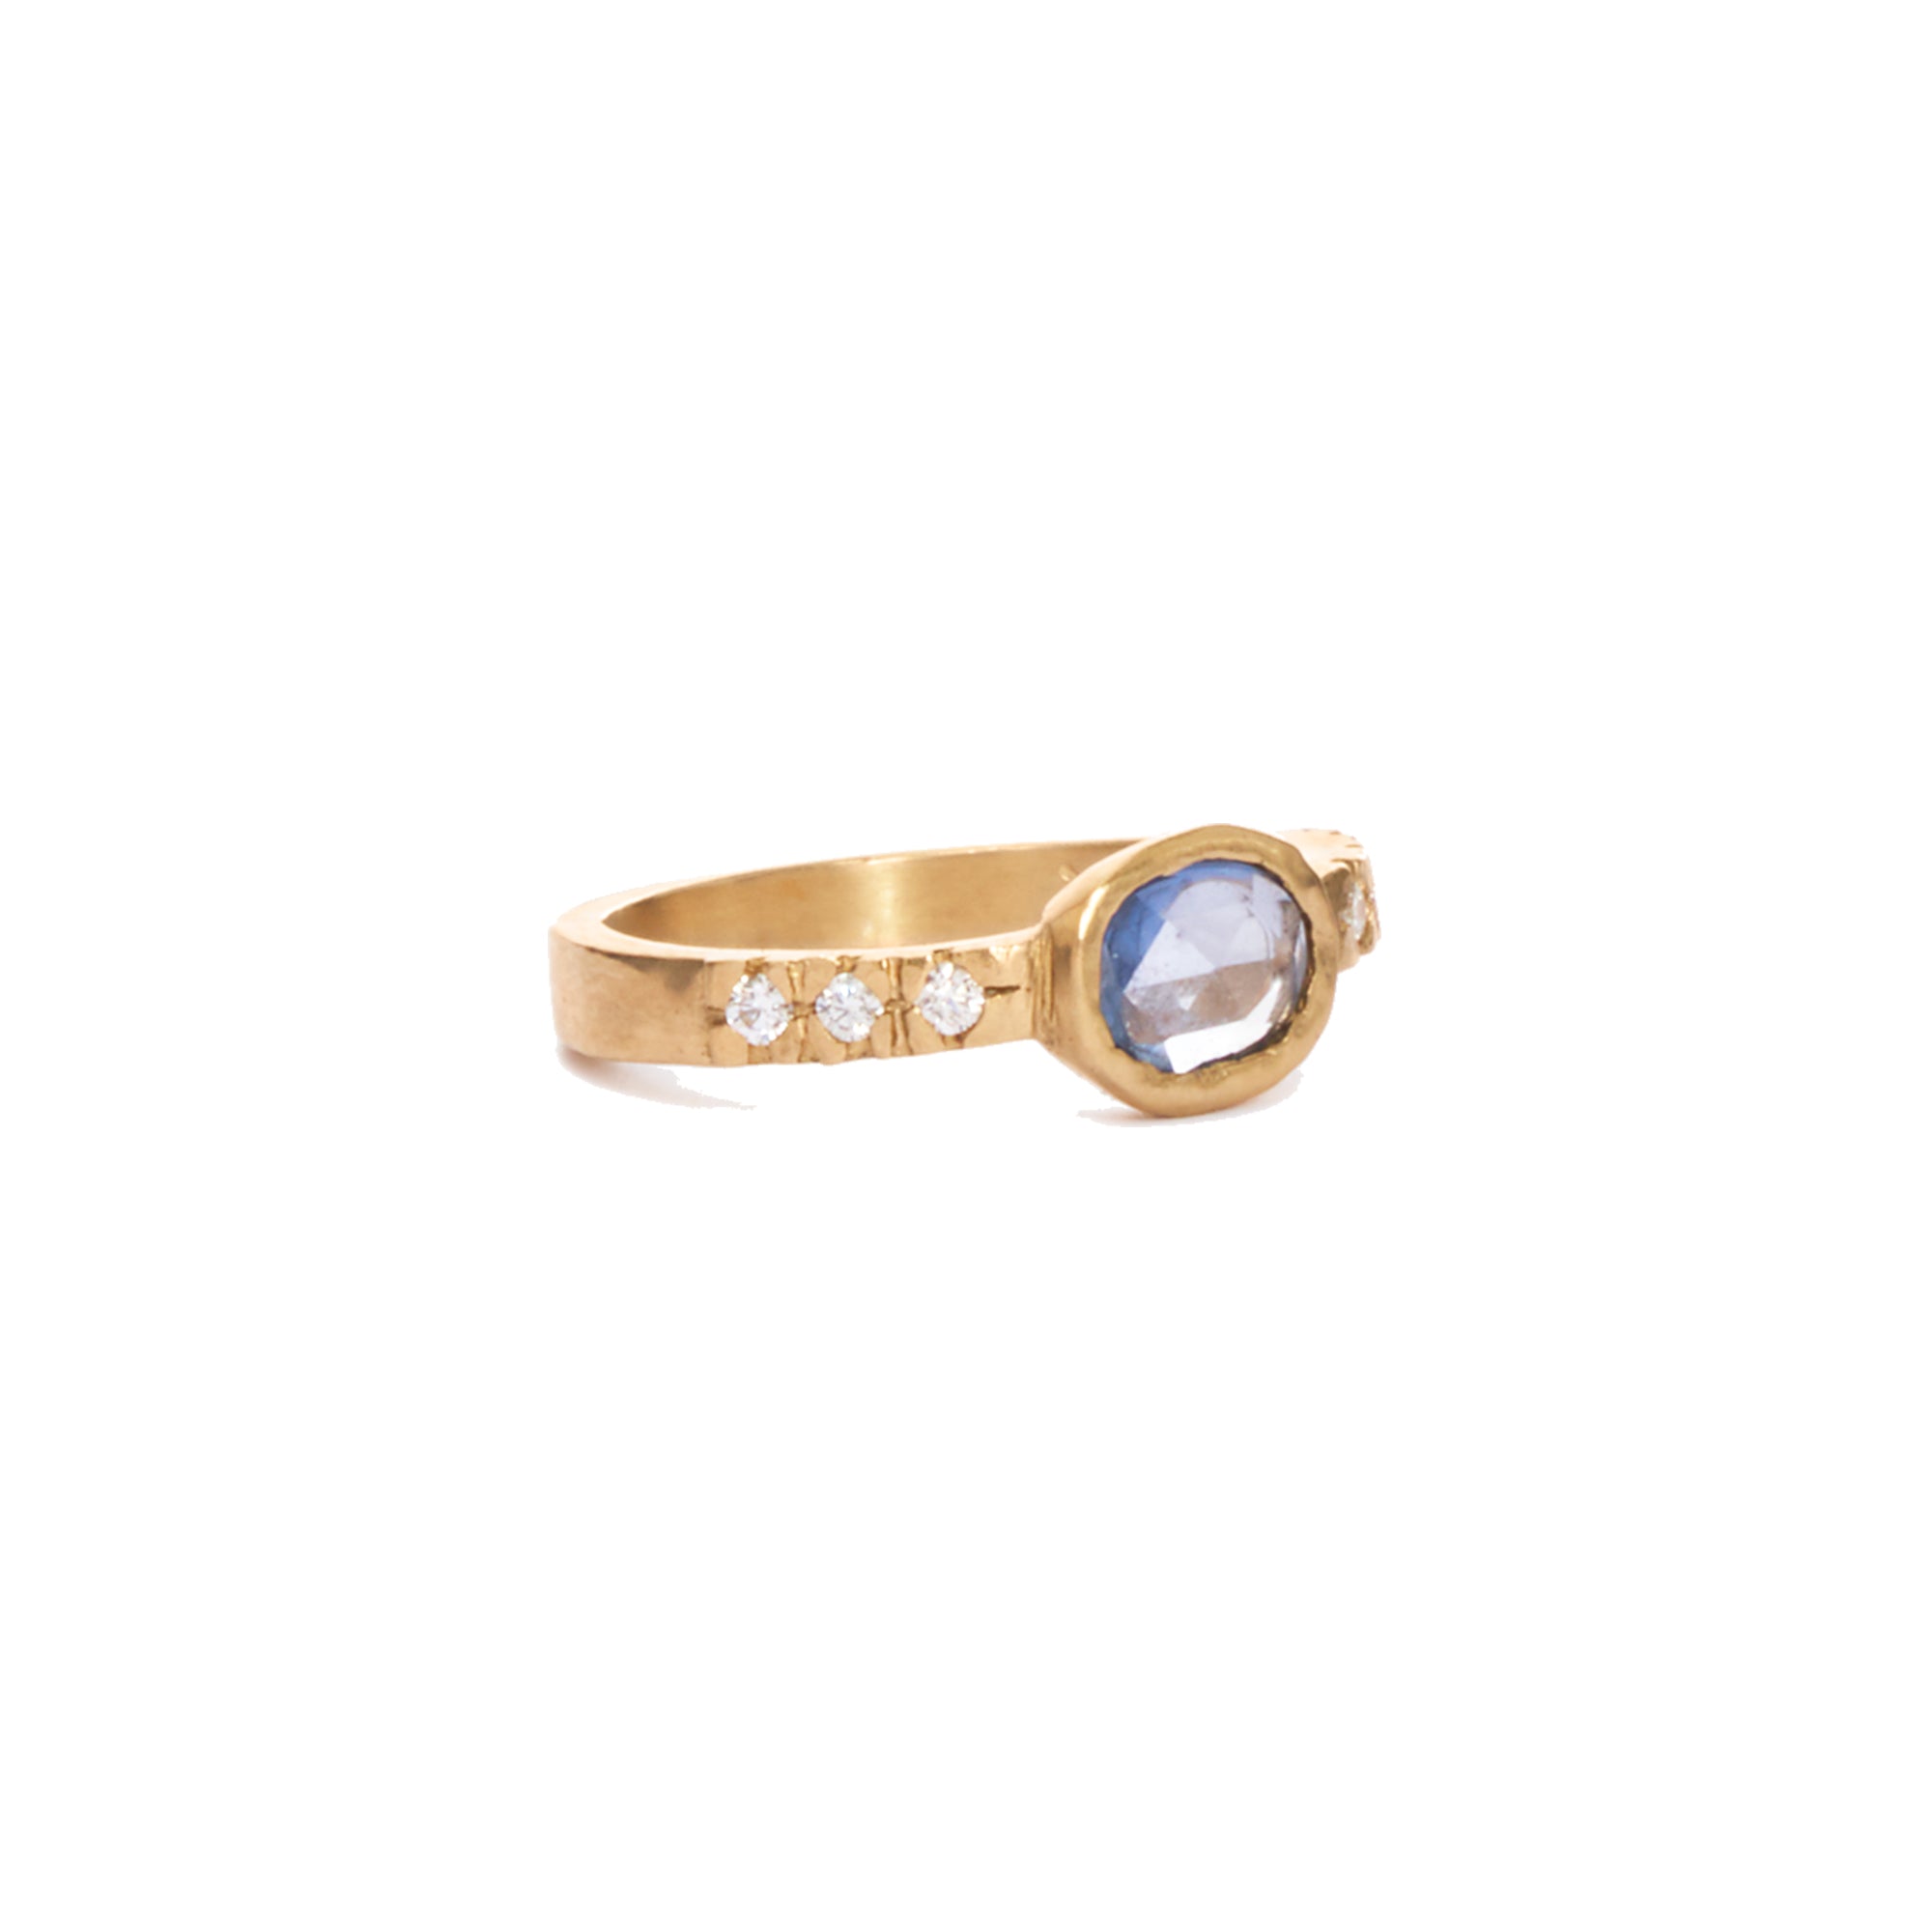 This one of a kind ring features a bezel set oval blue sapphire and six round diamonds, all set in 14k gold. 